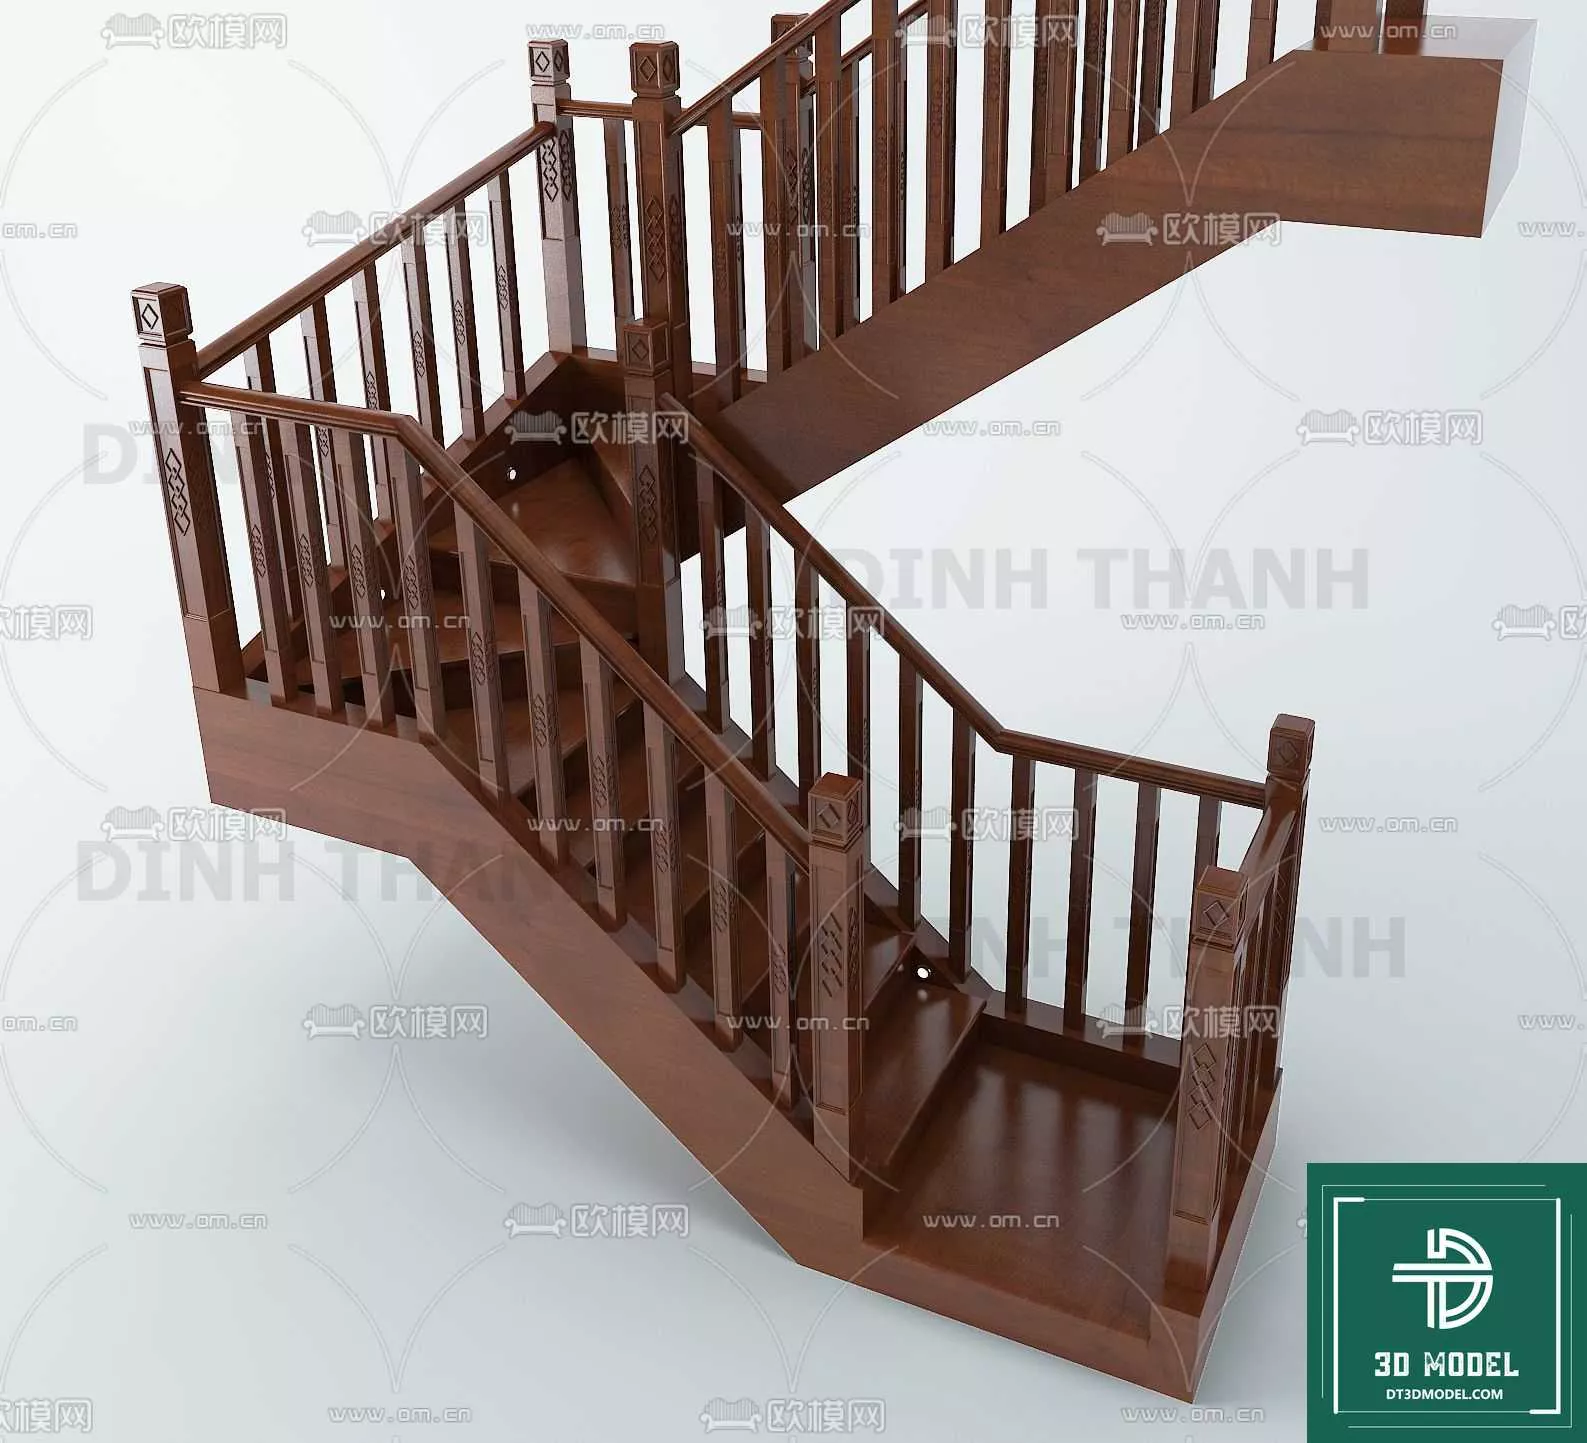 MODERN STAIR - SKETCHUP 3D MODEL - VRAY OR ENSCAPE - ID14152